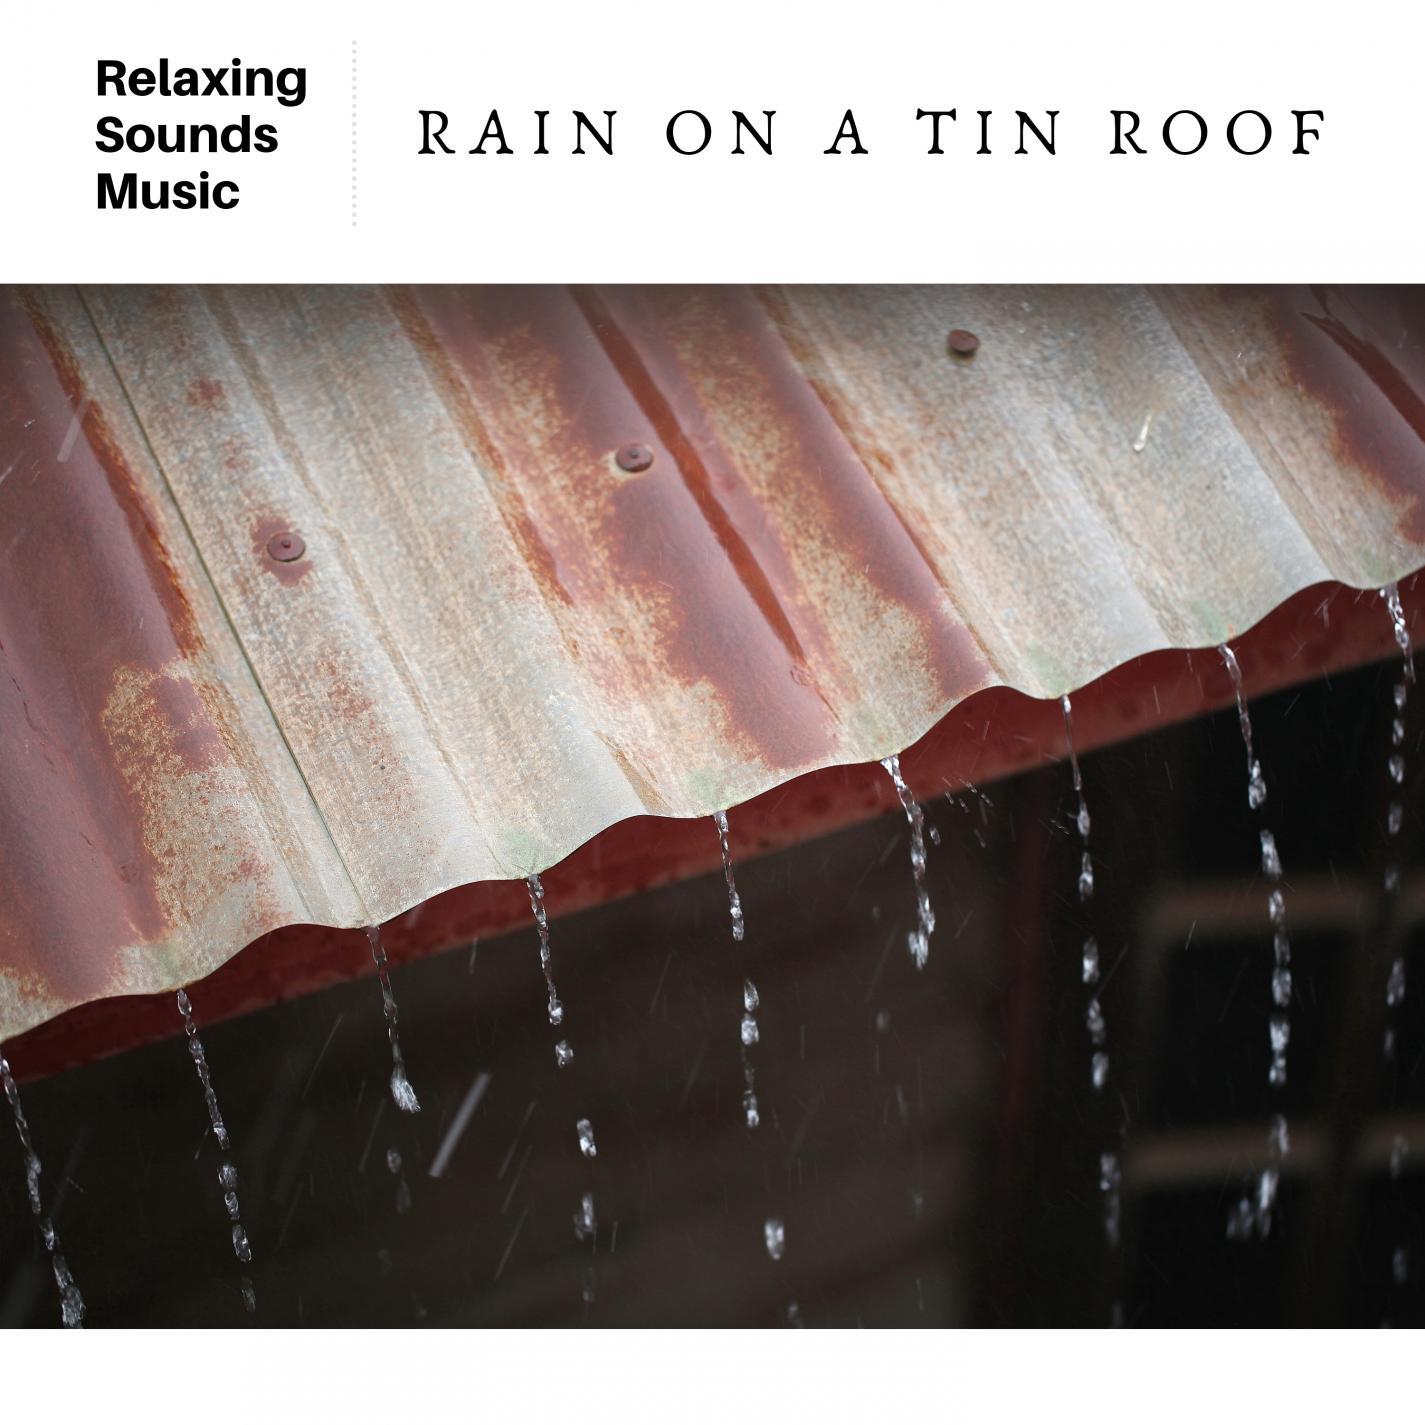 Moderate Rain on a Tin Roof